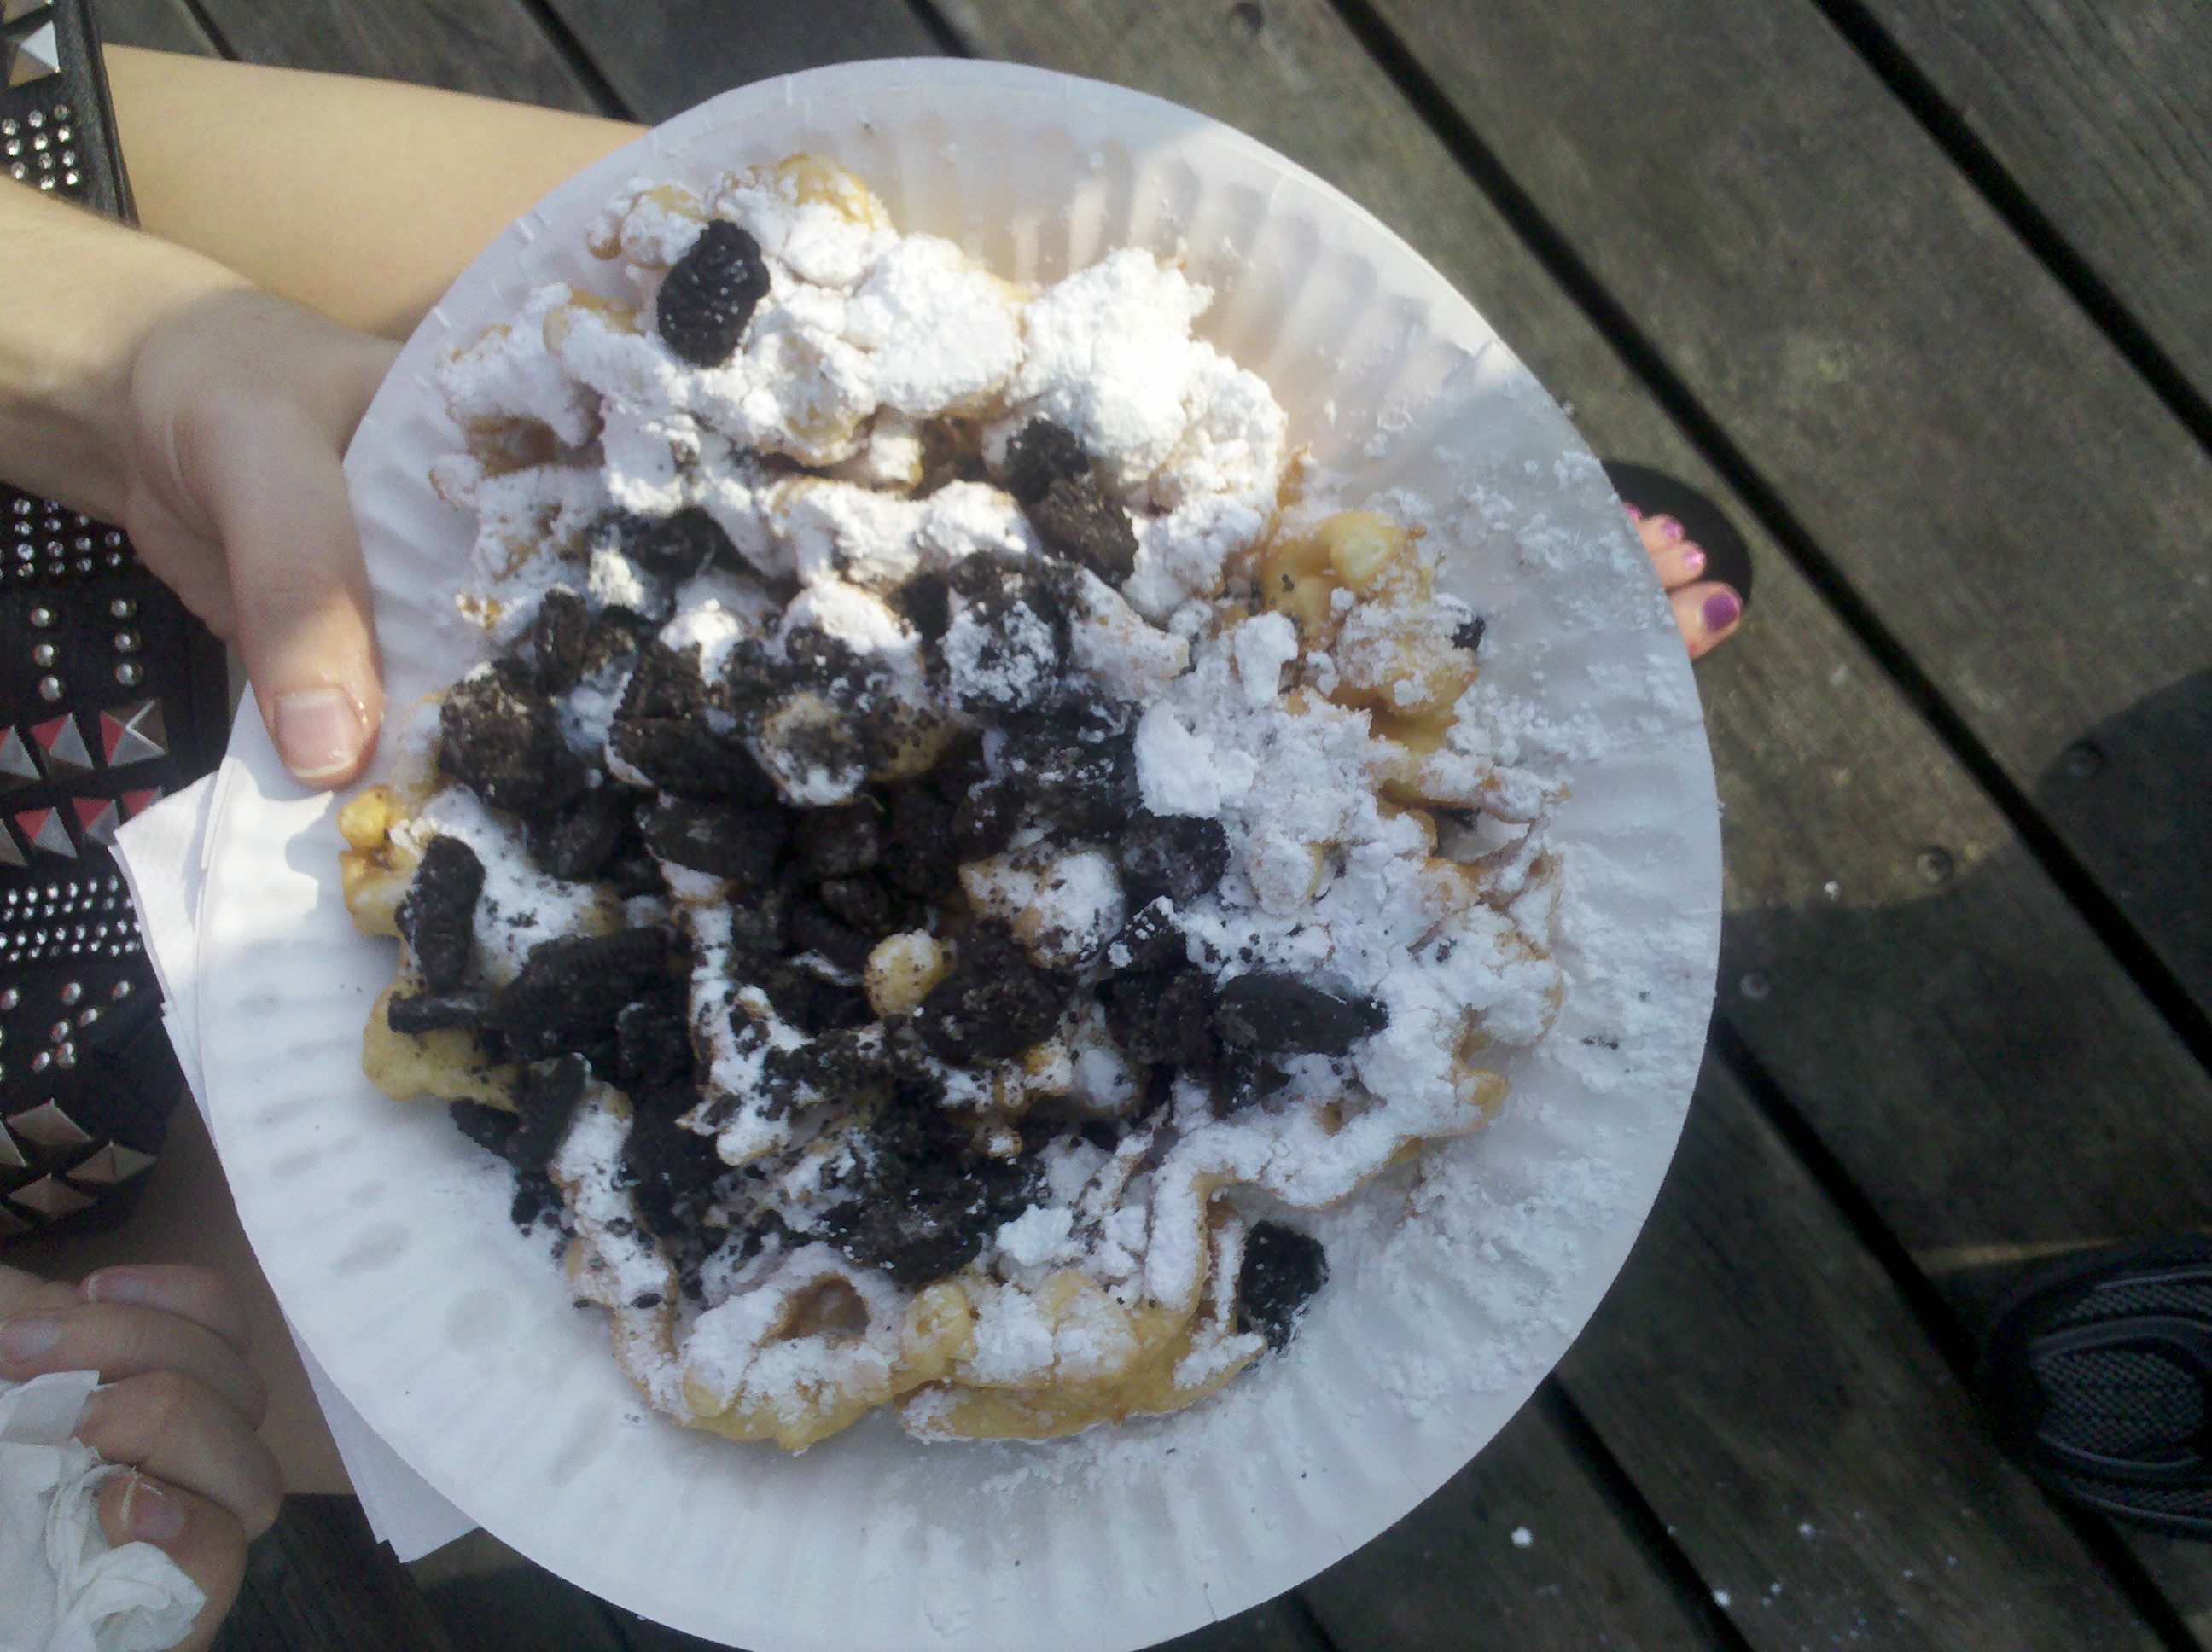 taste pretty much a regular funnel cake with some stale oreo cookie ...